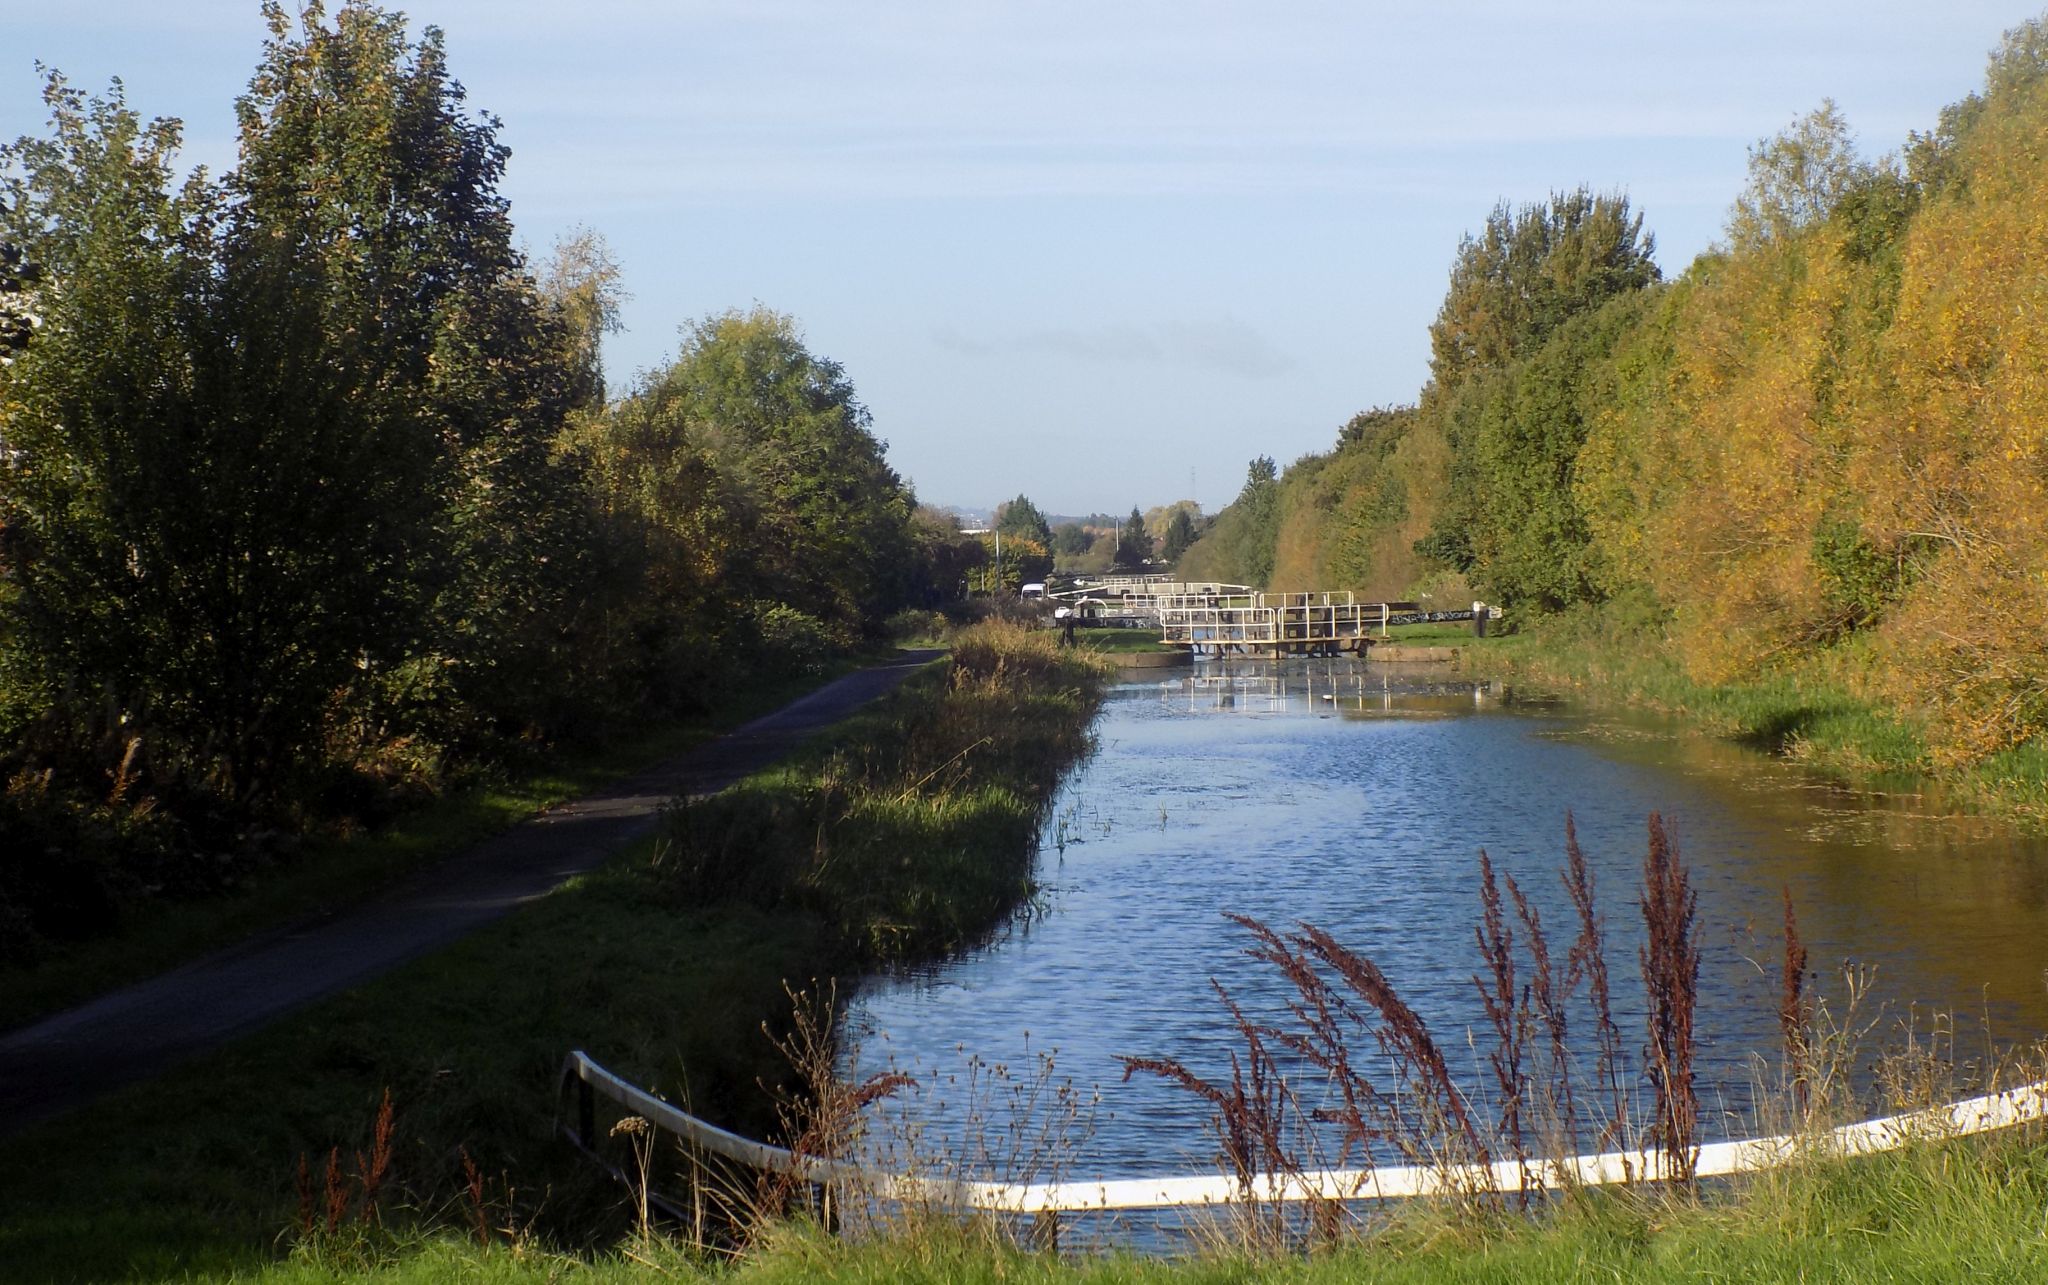 Forth and Clyde Canal between Westerton and Clydebank